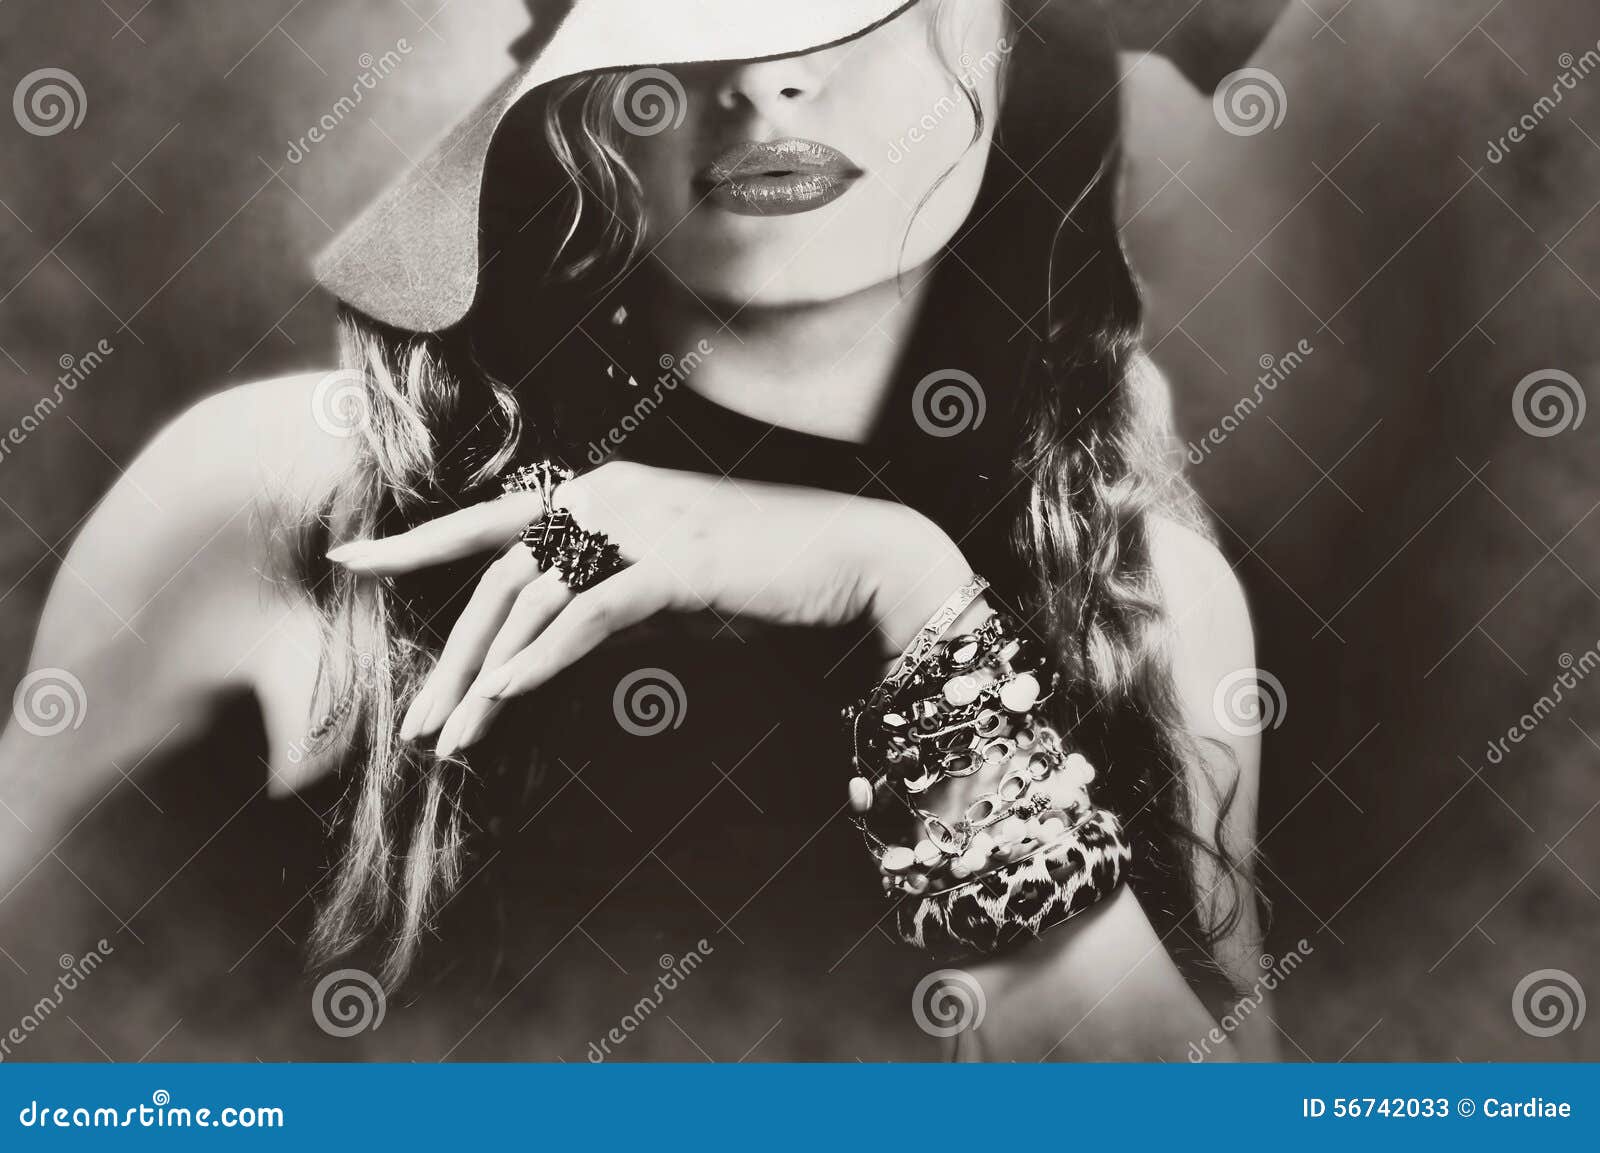 young pretty woman model lips makeup, vintage, retro hat and jewelry